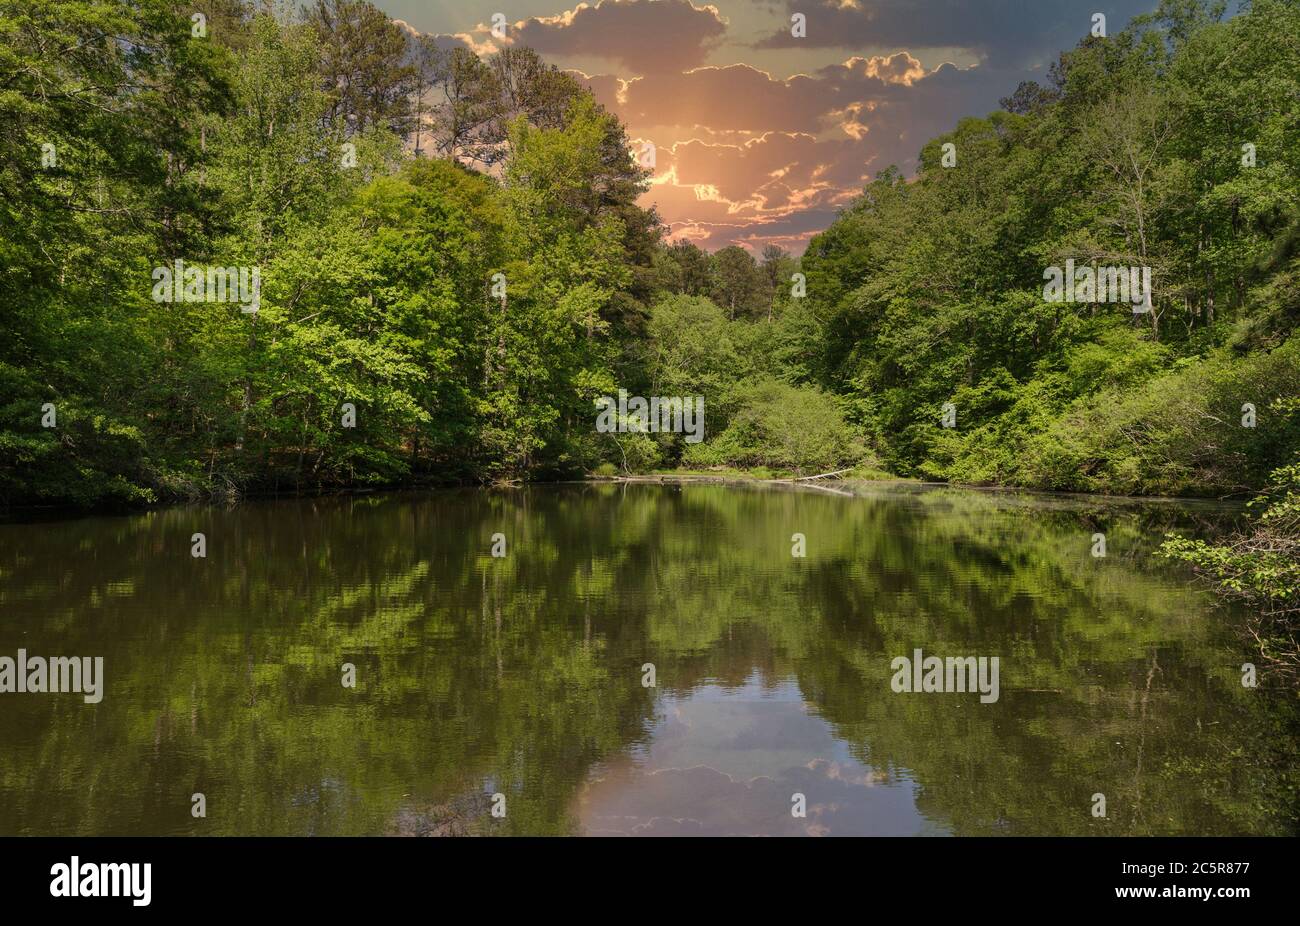 Lago calma in Green Forest sotto Sunset Sky Foto Stock